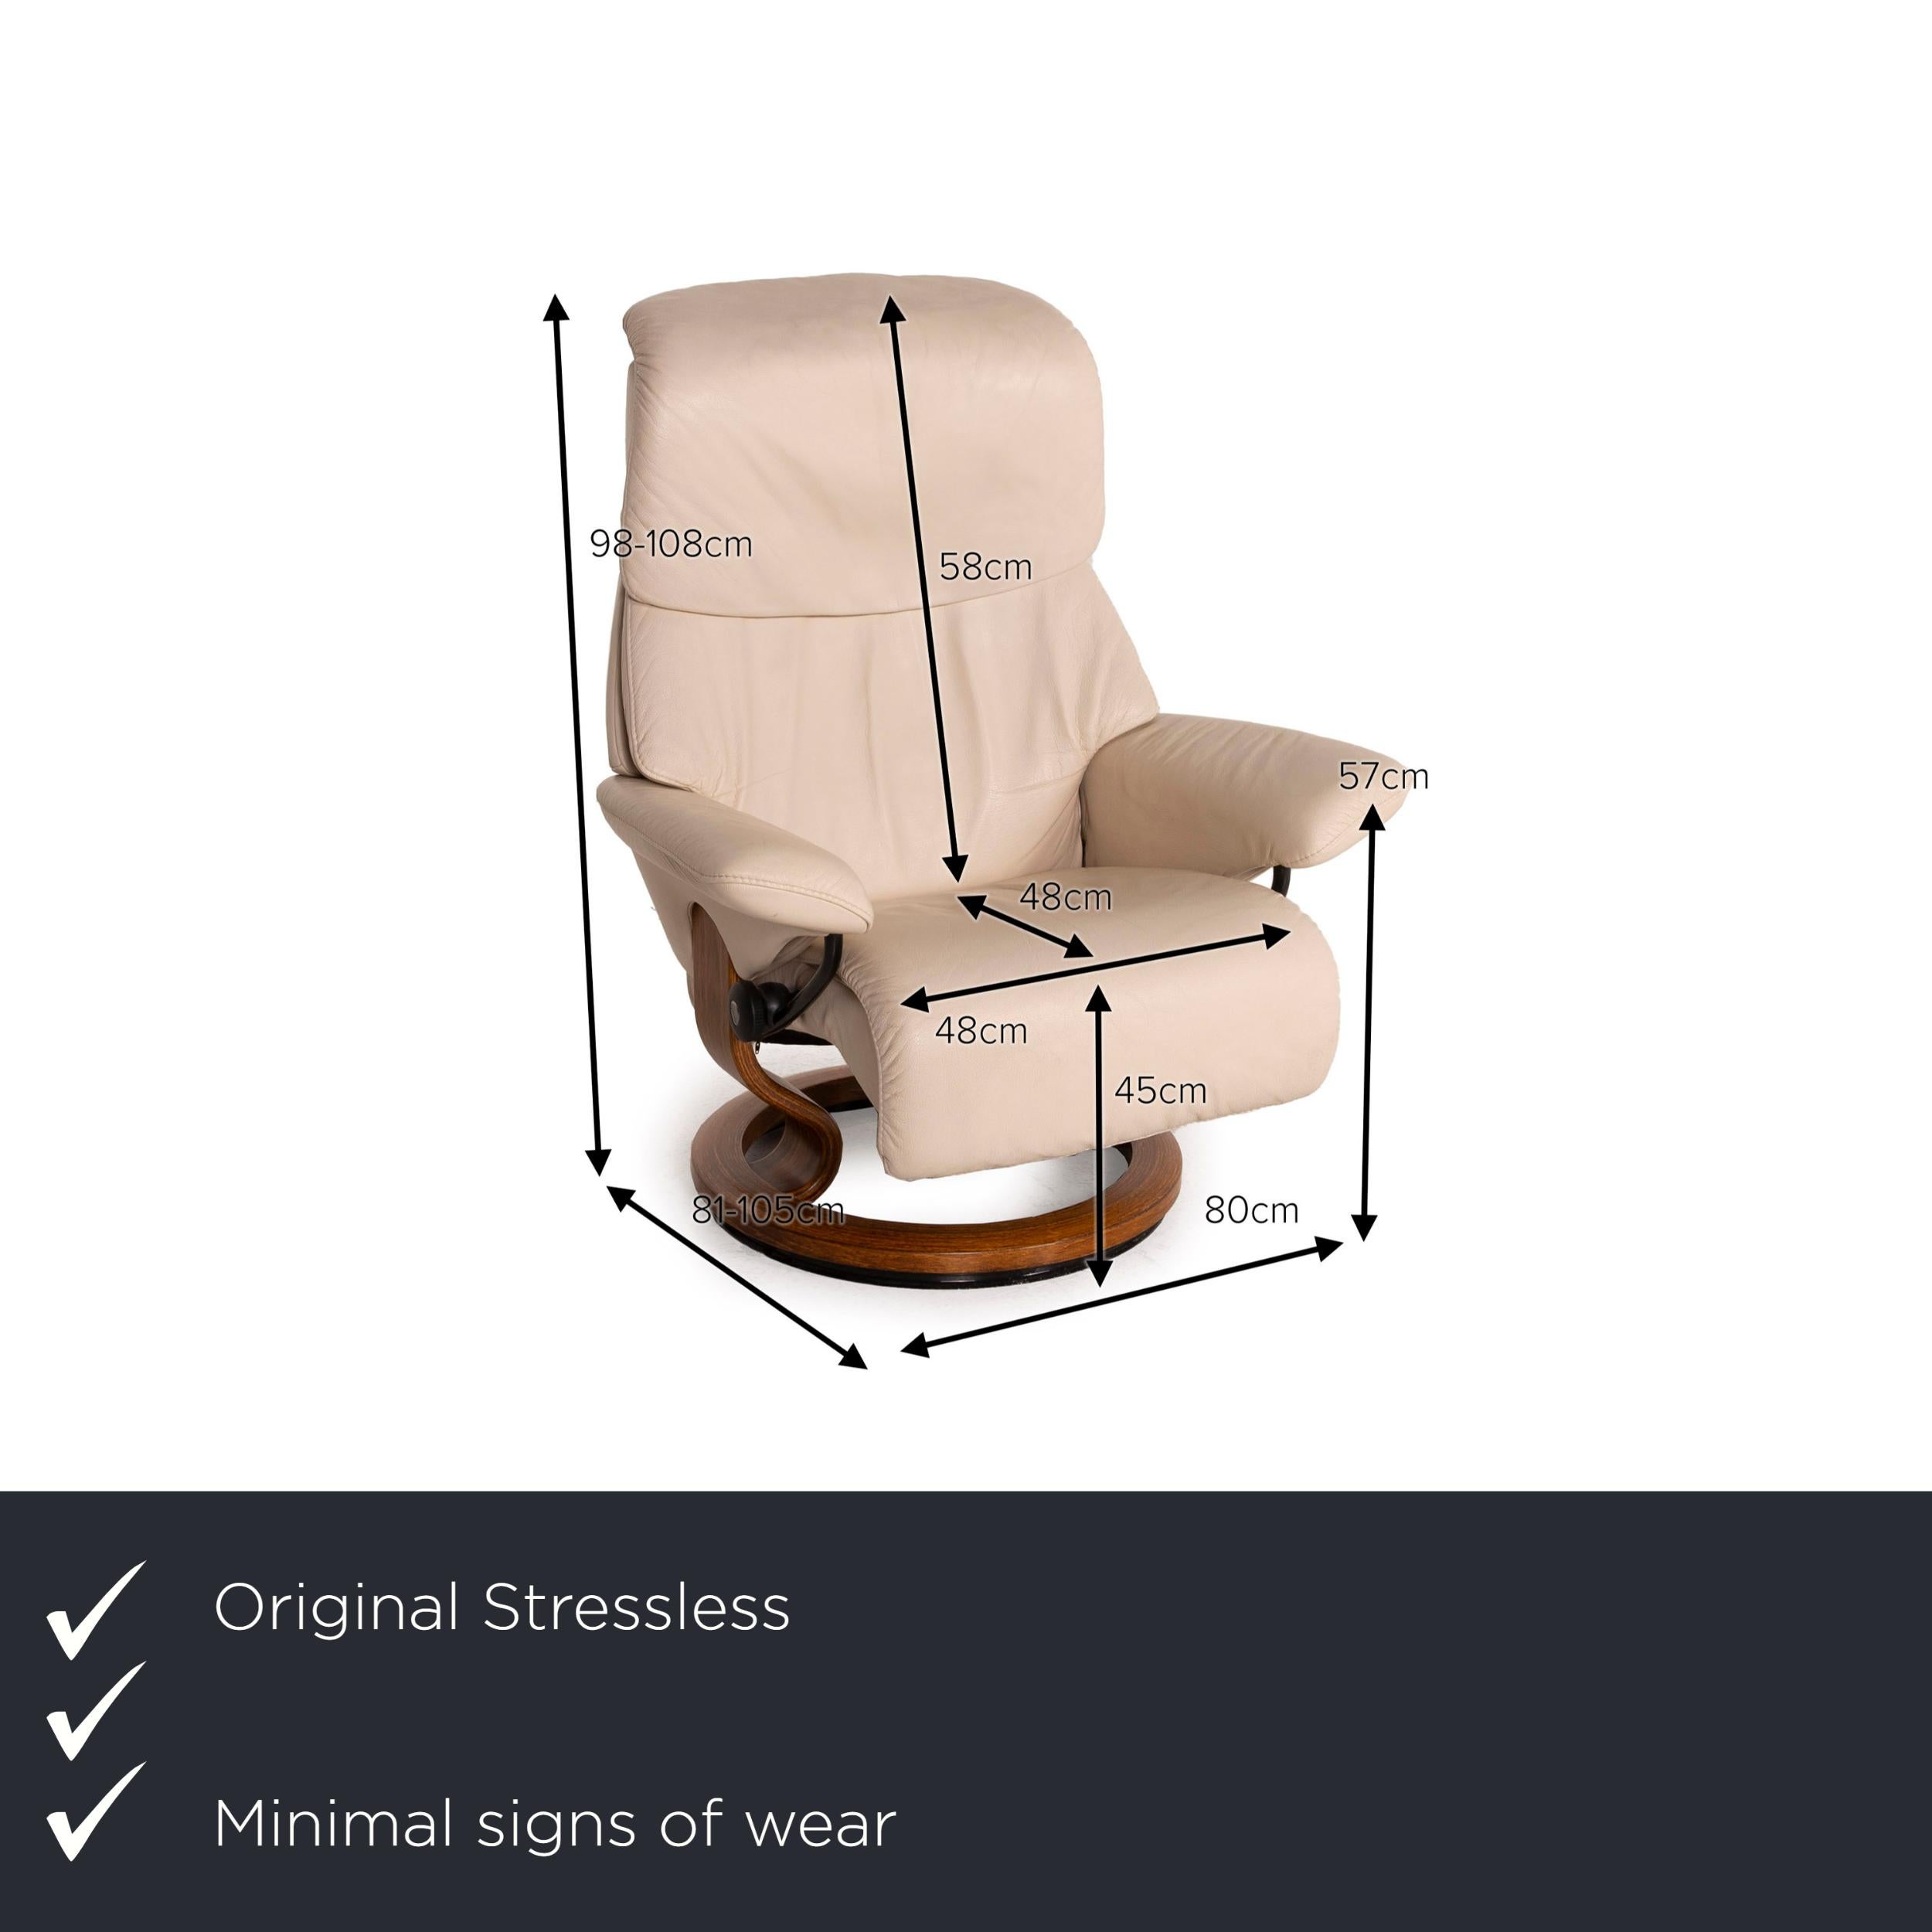 We present to you a Stressless vision leather armchair cream incl. Stool relaxation function.

Product measurements in centimeters:

Depth 81
Width 80
Height 98
Seat height 45
Rest height 57
Seat depth 48
Seat width 48
Back height